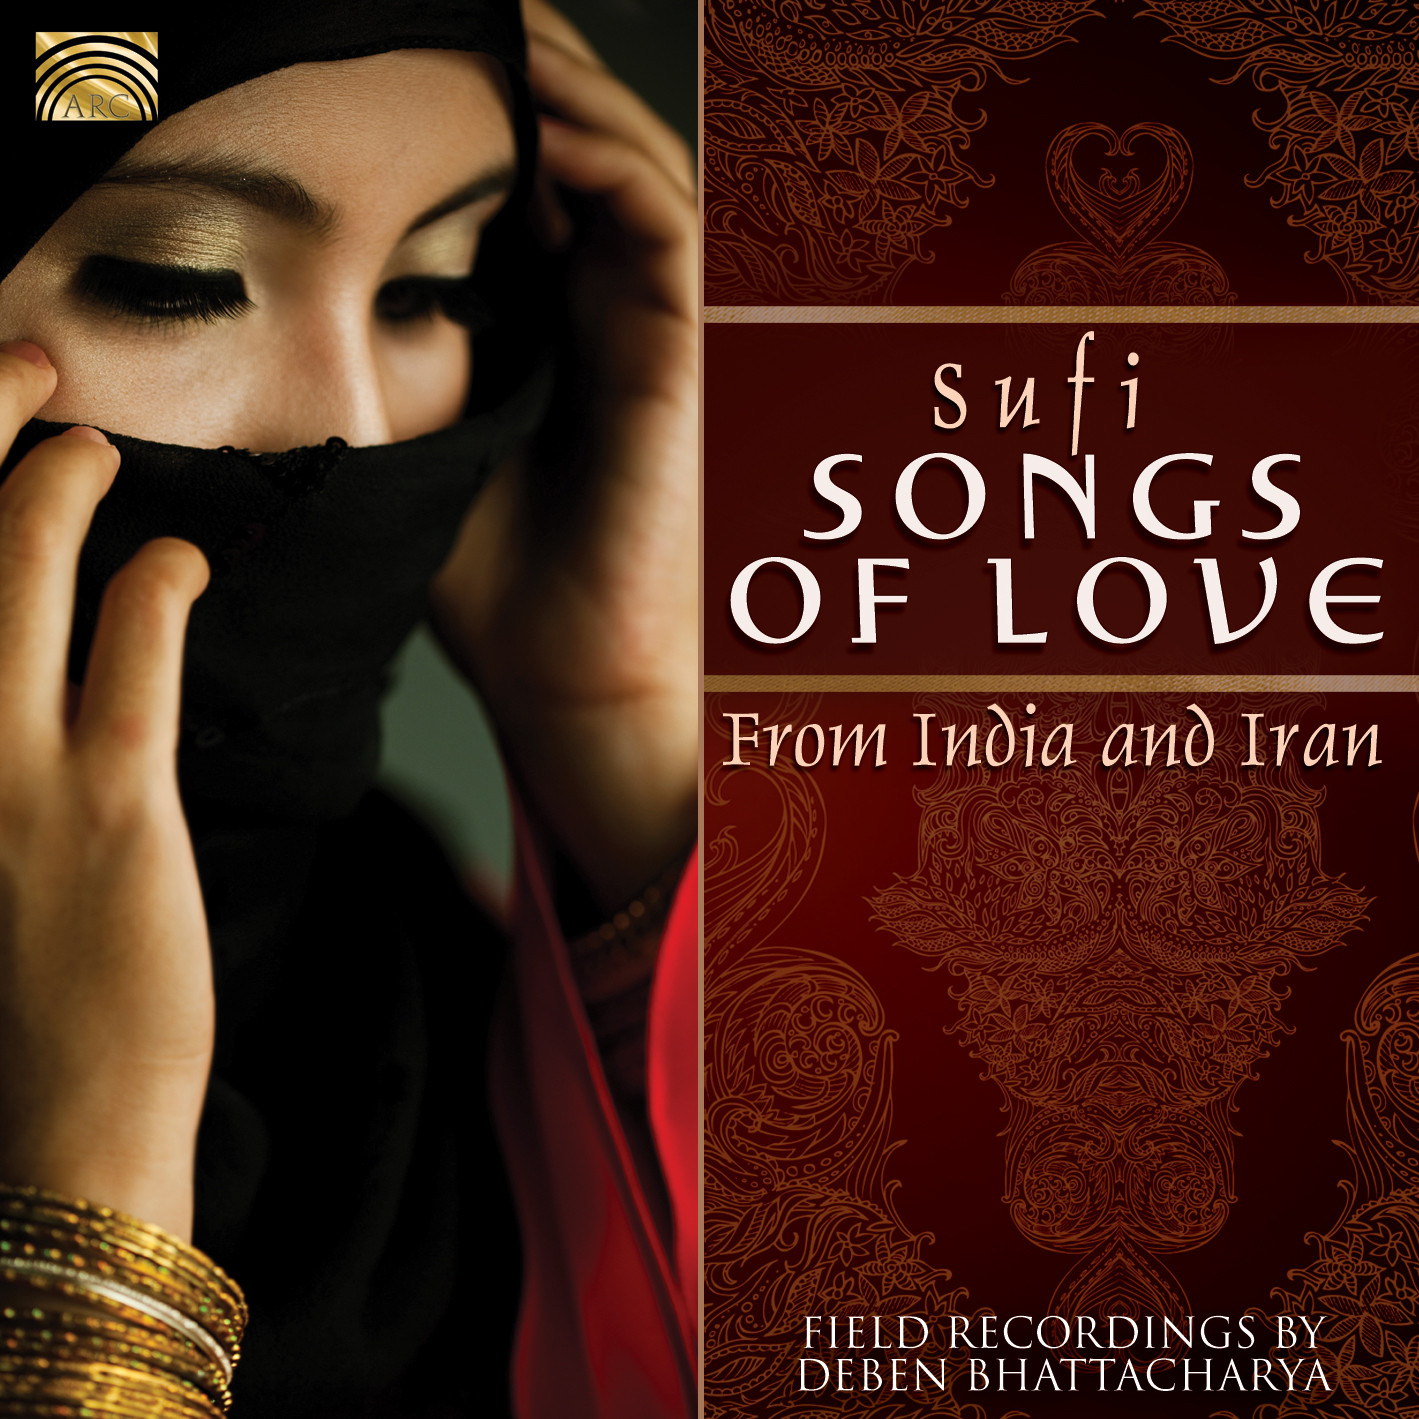 EUCD2436 Sufi Songs of Love, from India and Iran - Field recordings by Deben Bhattacharya